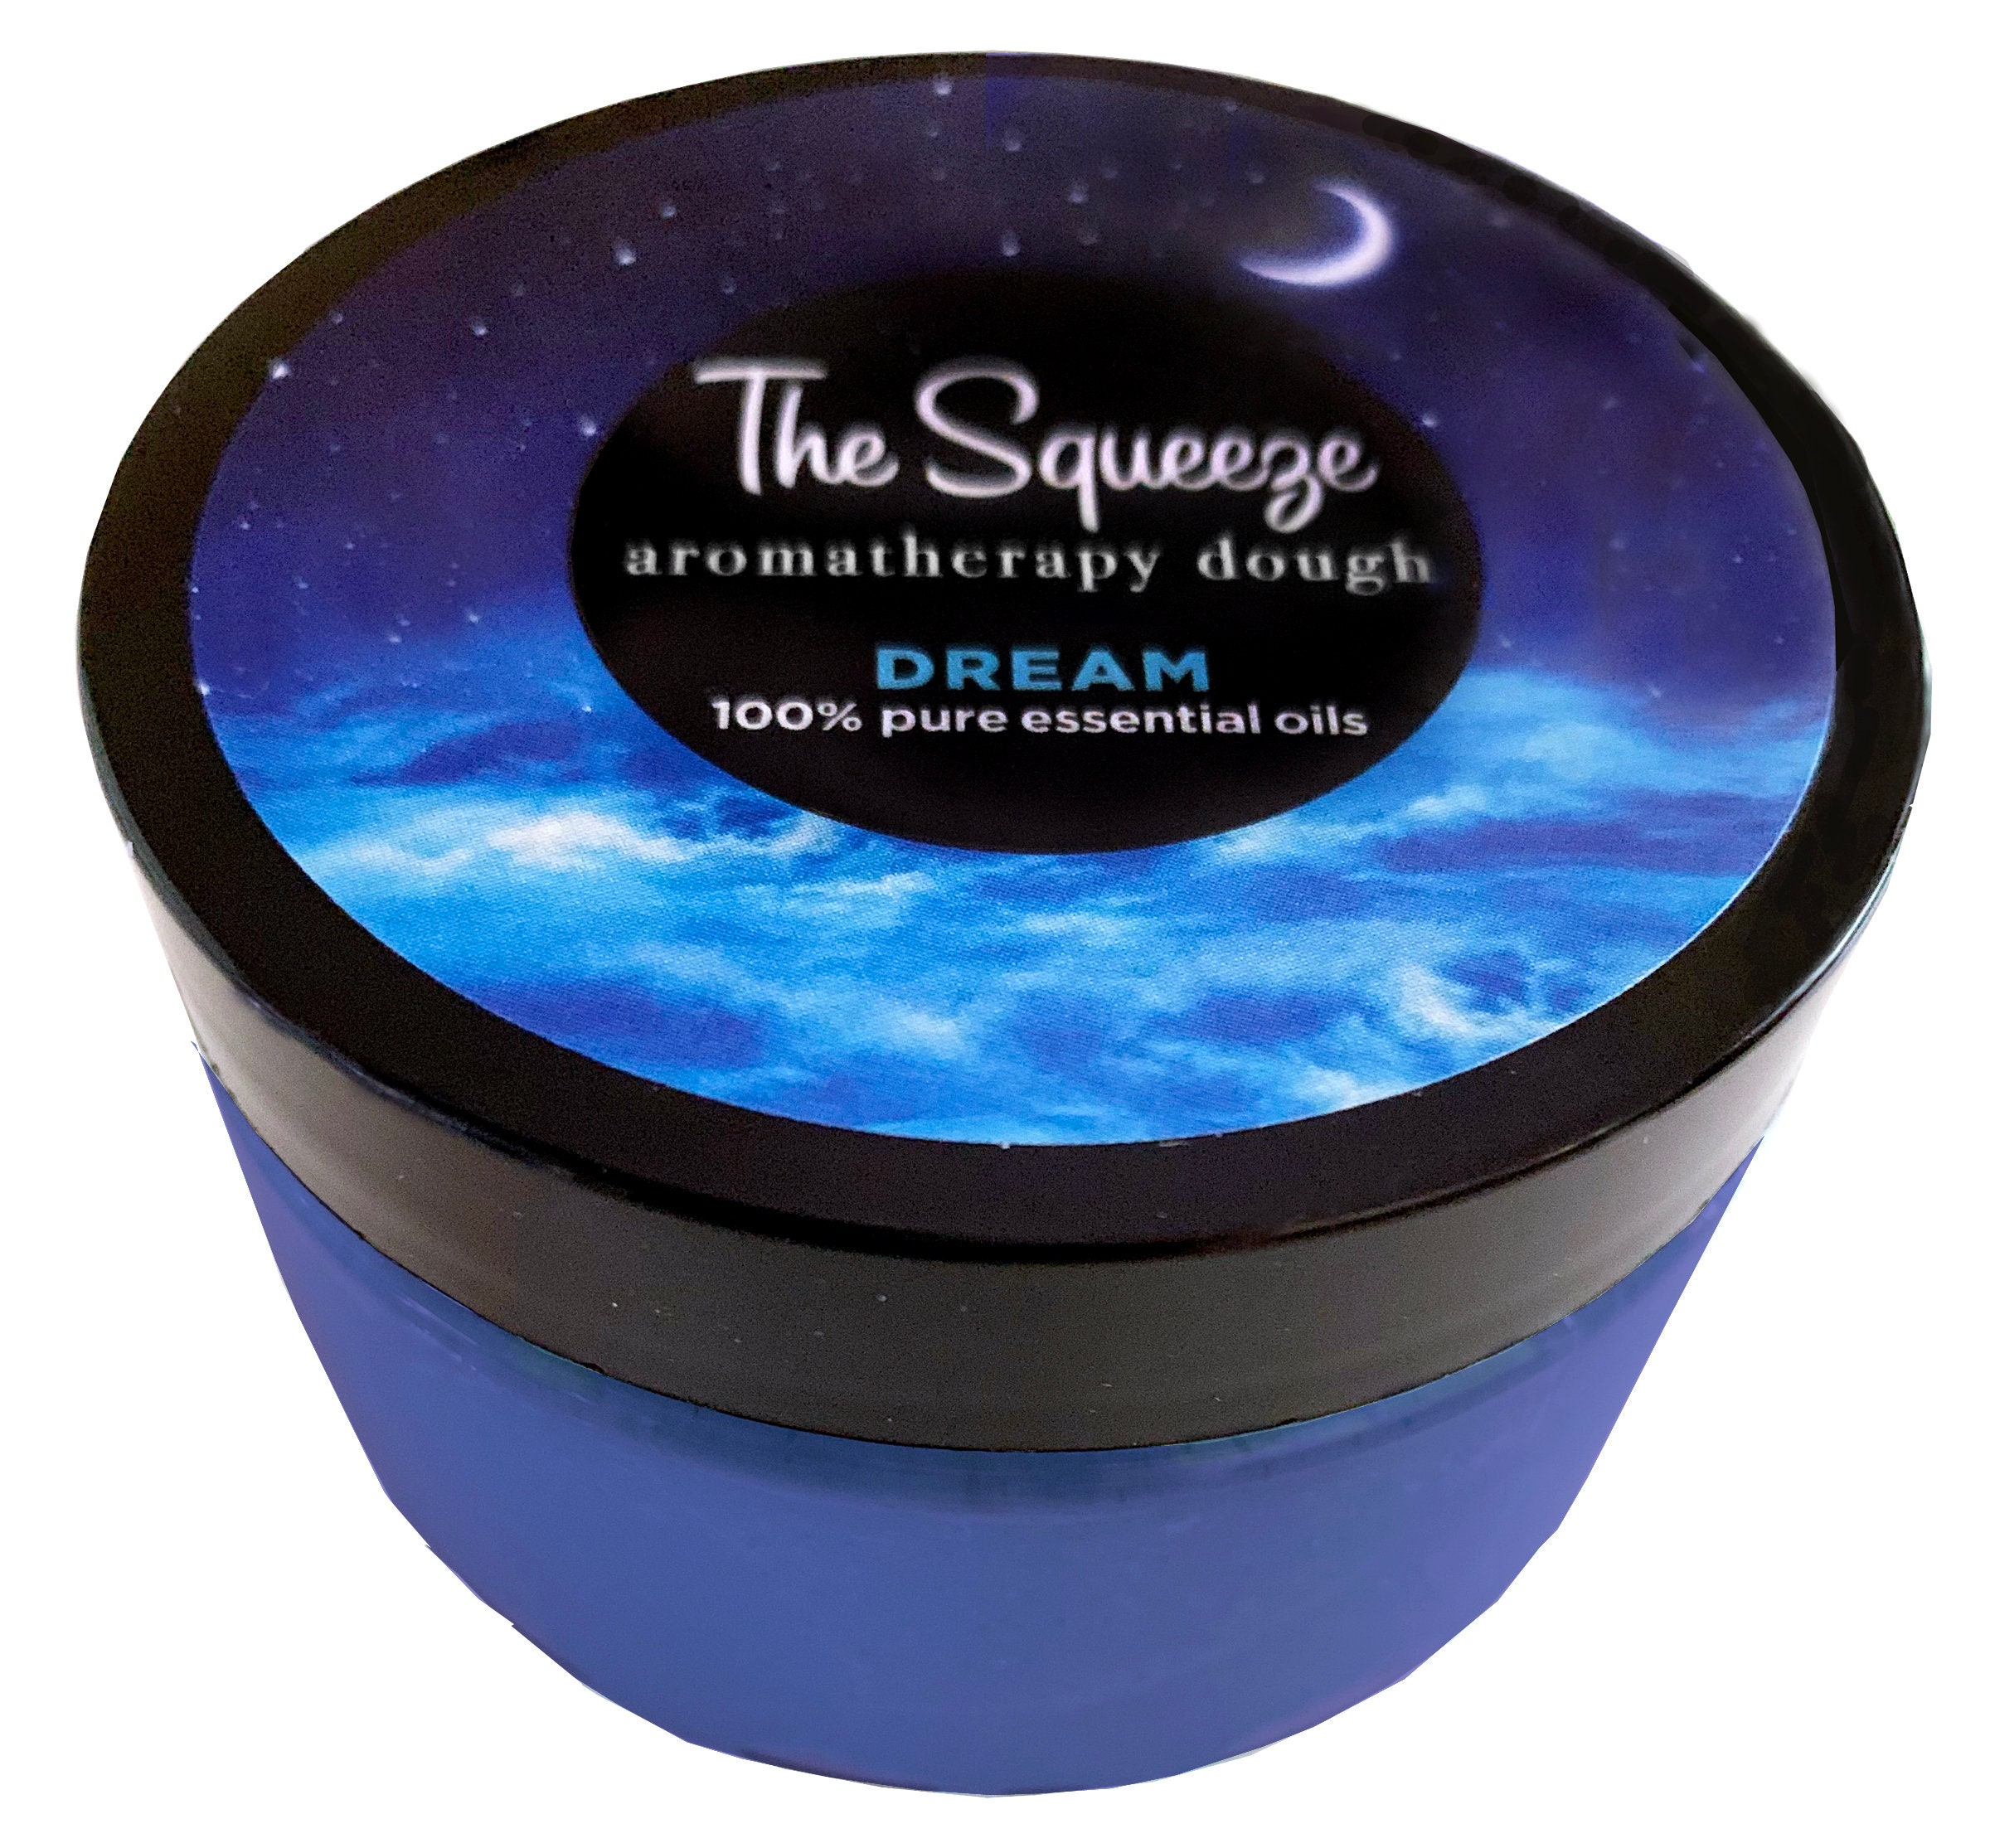 The Squeeze - Dream For Sleep Aid Blend- 100% Essential Oil Stress Relief Therapy Dough, Ball, Aromatherapy Putty